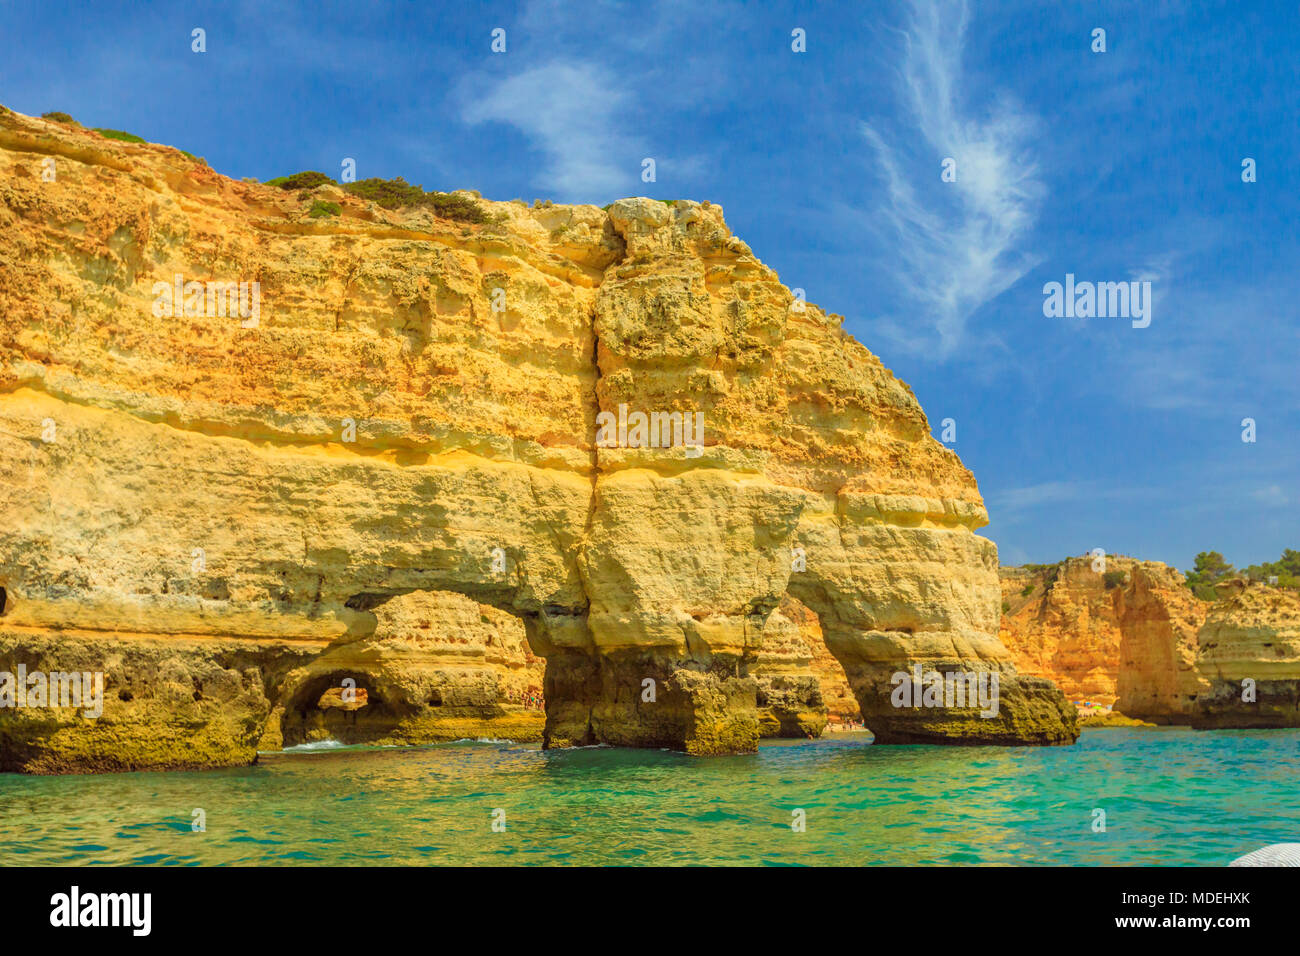 The iconic natural arch of Praia da Marinha in Algarve, Portugal, Europe view from popular boat cave tour along Algarve coast. Marinha Beach is one of the 100 most beautiful beaches in the world. Stock Photo